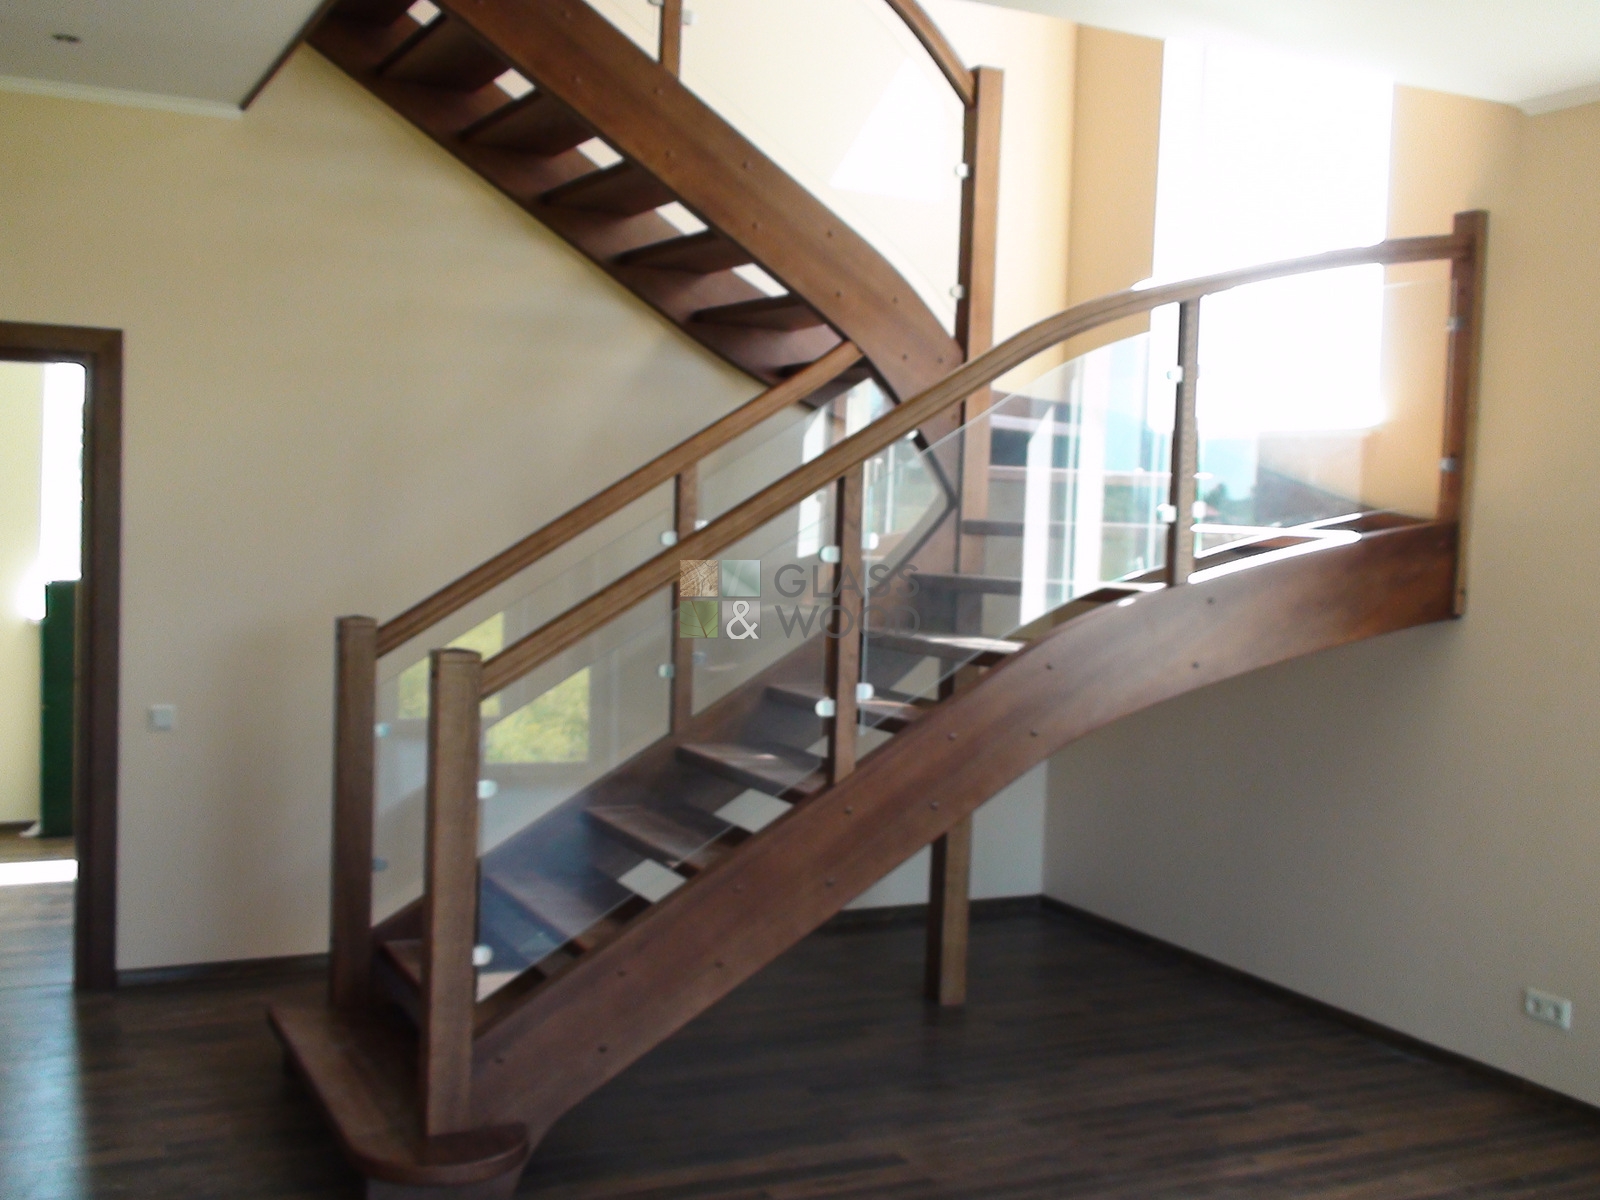 Wooden stairs with glass